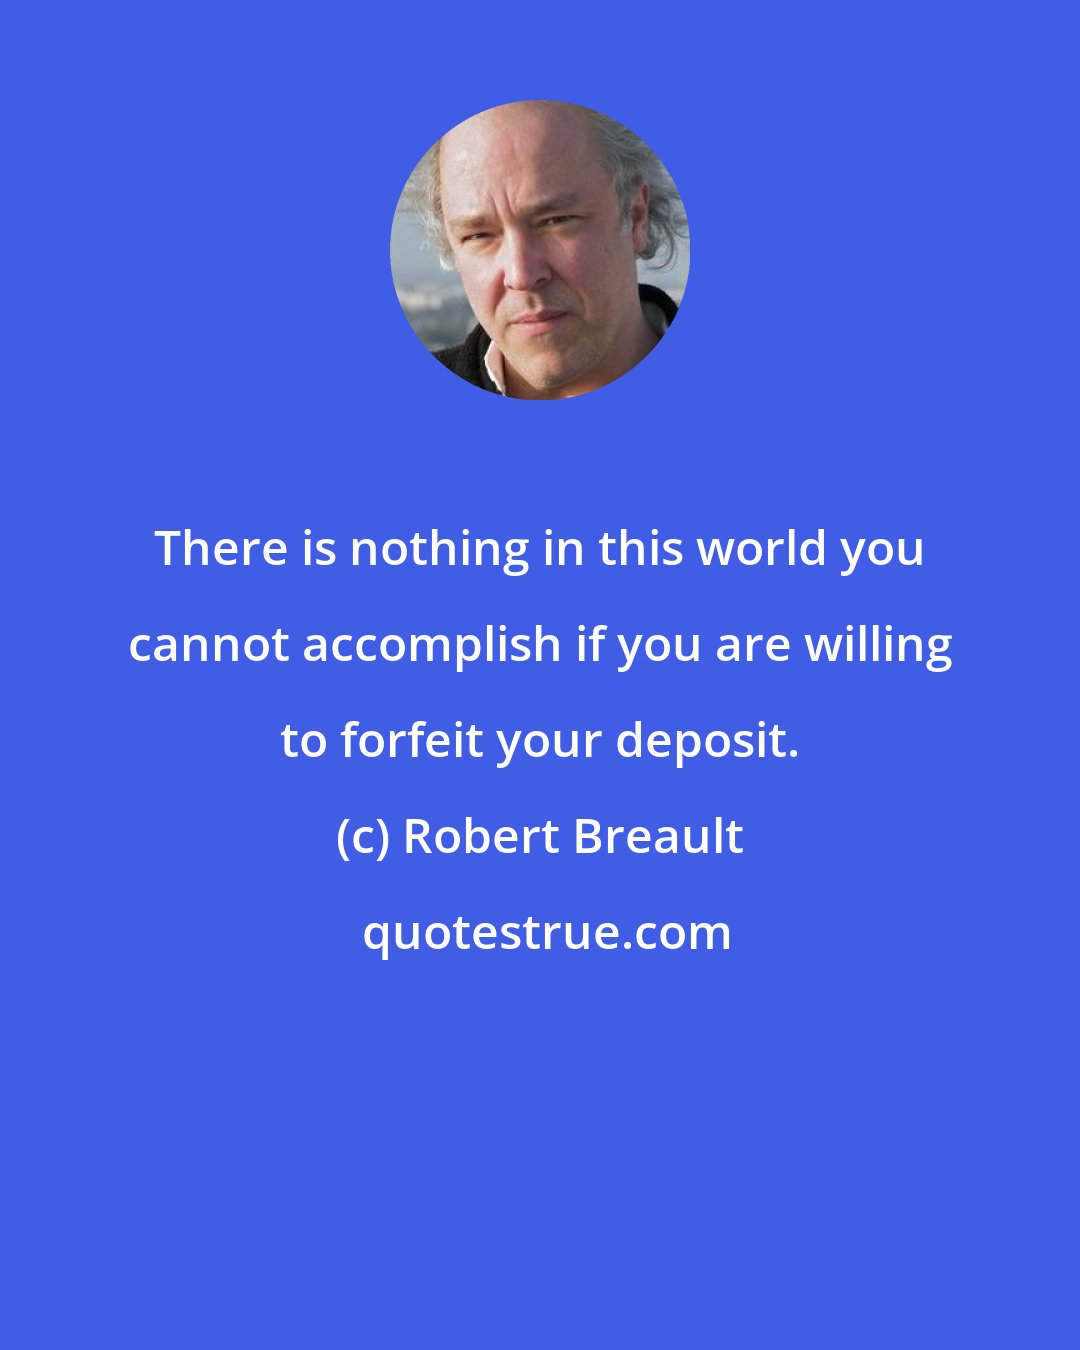 Robert Breault: There is nothing in this world you cannot accomplish if you are willing to forfeit your deposit.